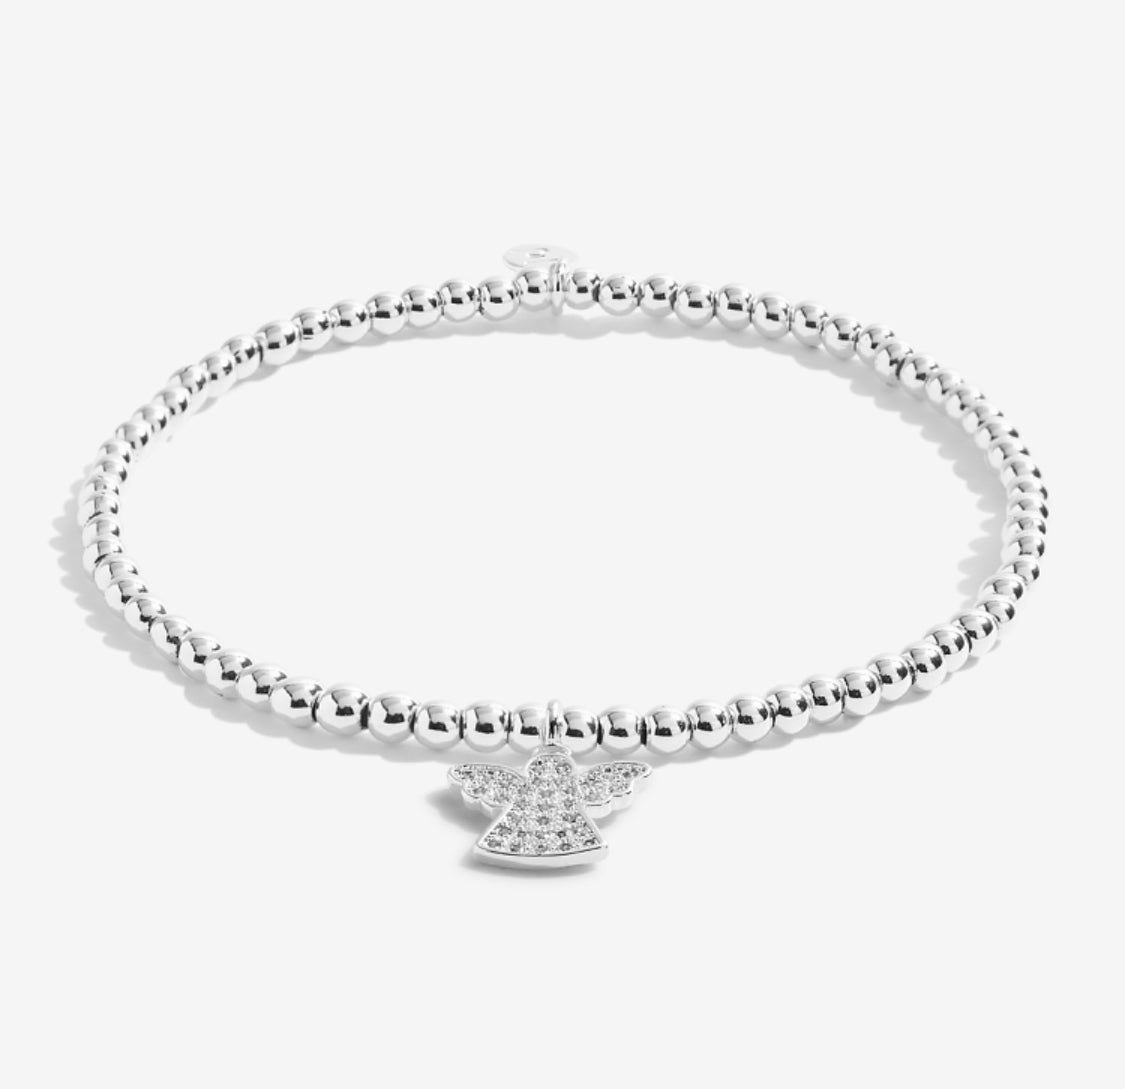 Joma Jewellery- A Little Angel Watching Over You Bracelet